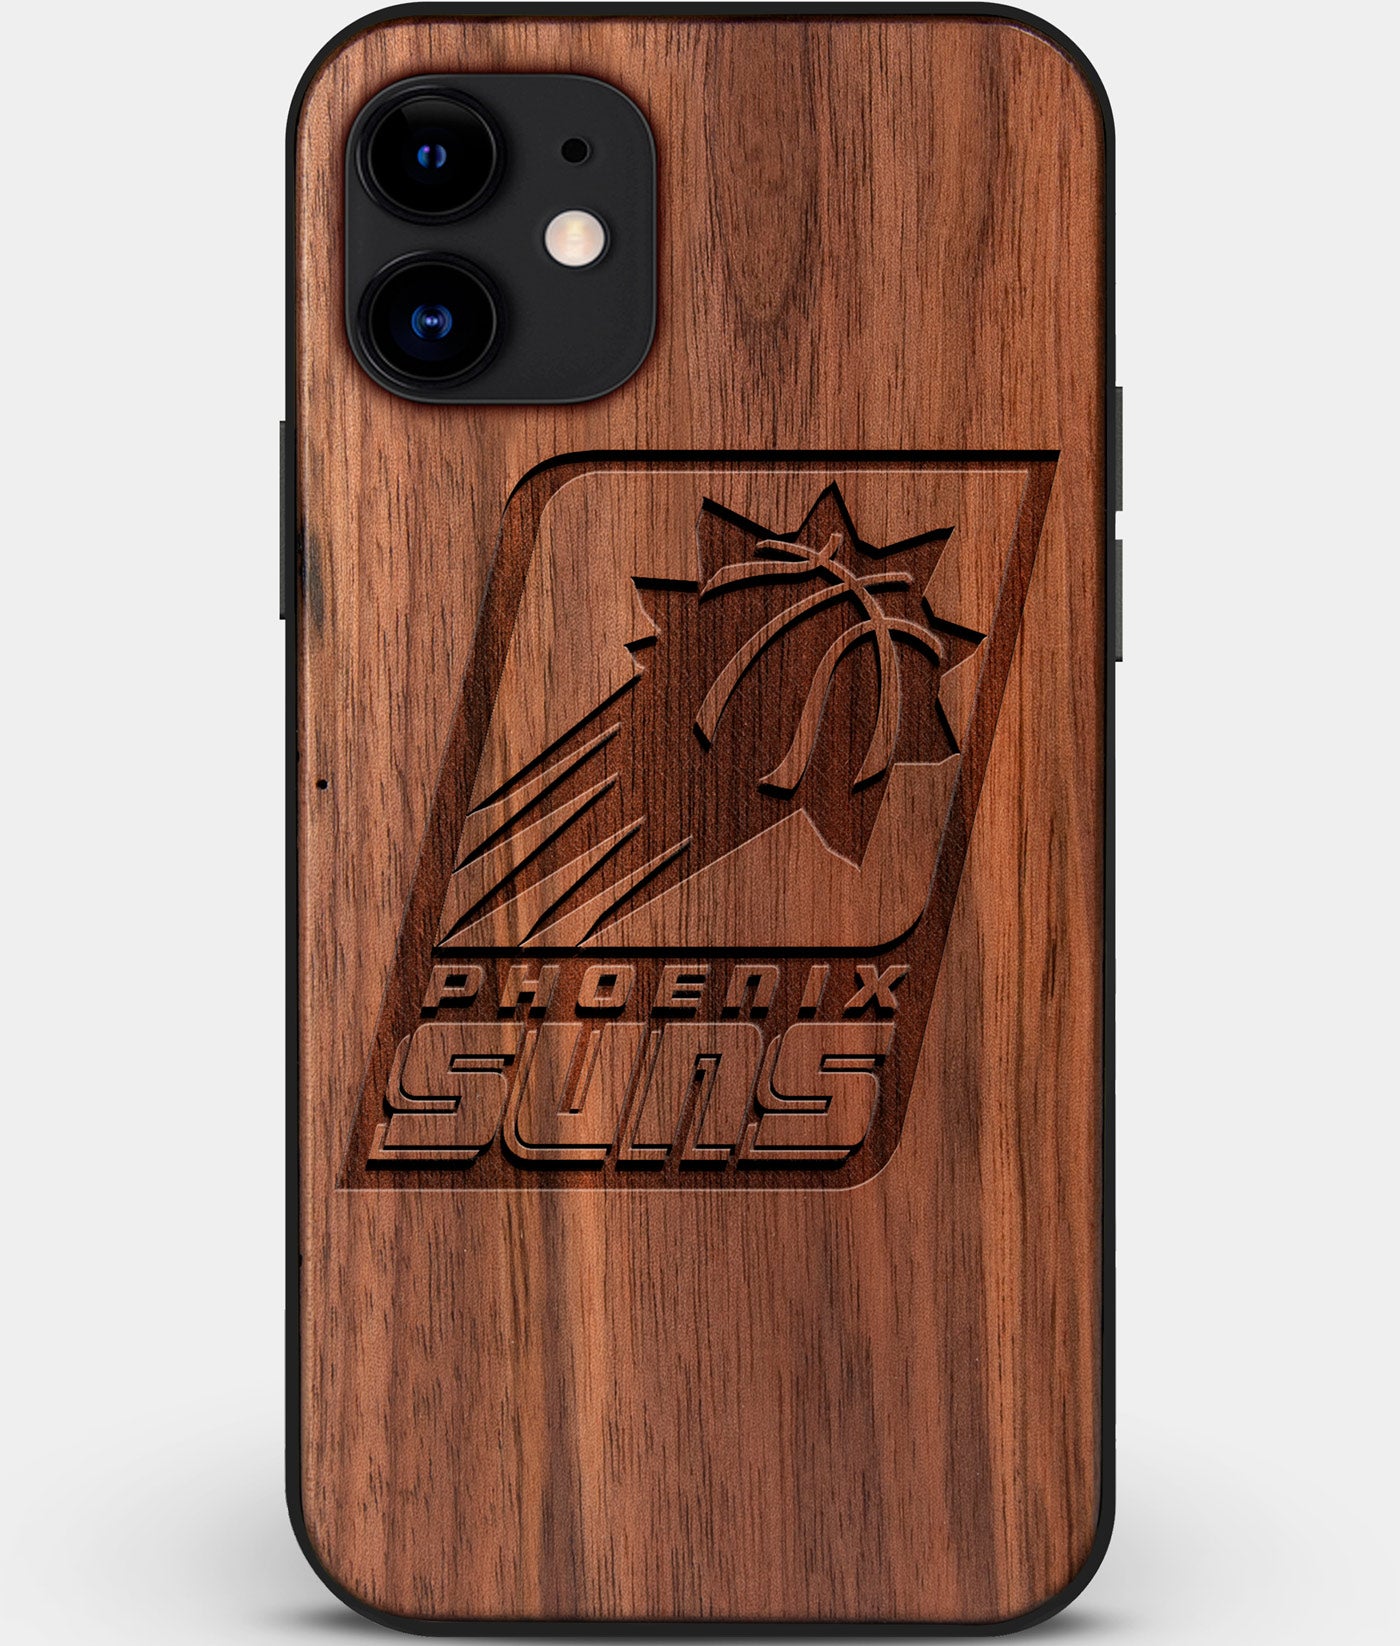 Custom Carved Wood Phoenix Suns iPhone 11 Case | Personalized Walnut Wood Phoenix Suns Cover, Birthday Gift, Gifts For Him, Monogrammed Gift For Fan | by Engraved In Nature